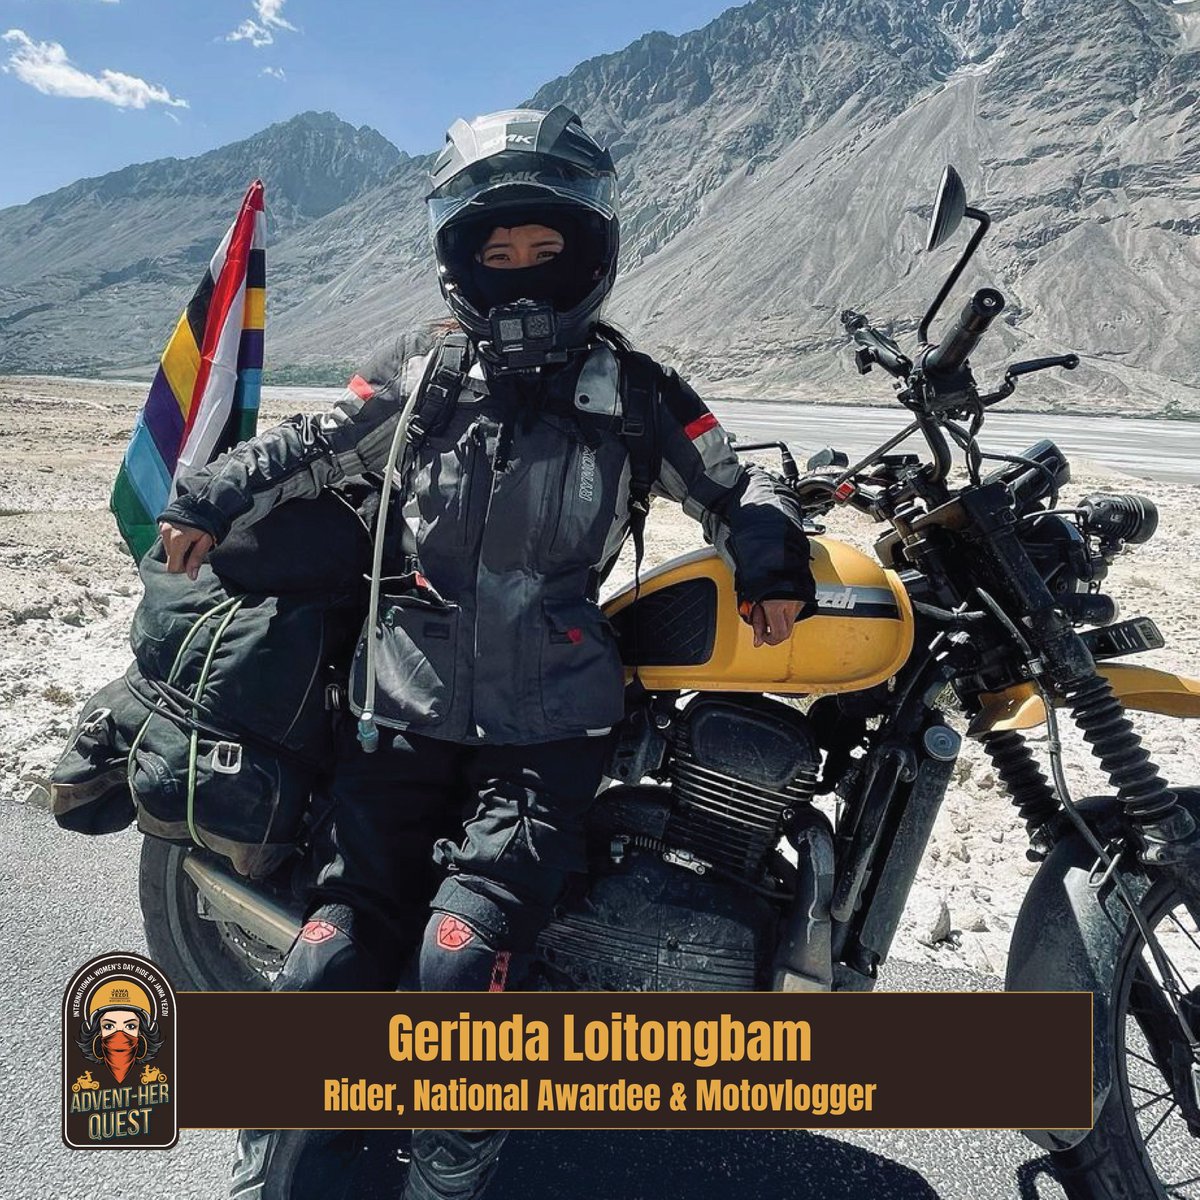 'It was my Dad’s dream to ride to Ladakh, which I took-up and was able to fulfil it on my #Yezdi Scrambler,” says @gerinda_loitongbam (Instagram)
.
She earned the title of ‘First woman rider from Manipur to reach Umling La'.

#InternationalWomensDay #YezdiScrambler #IWD2023